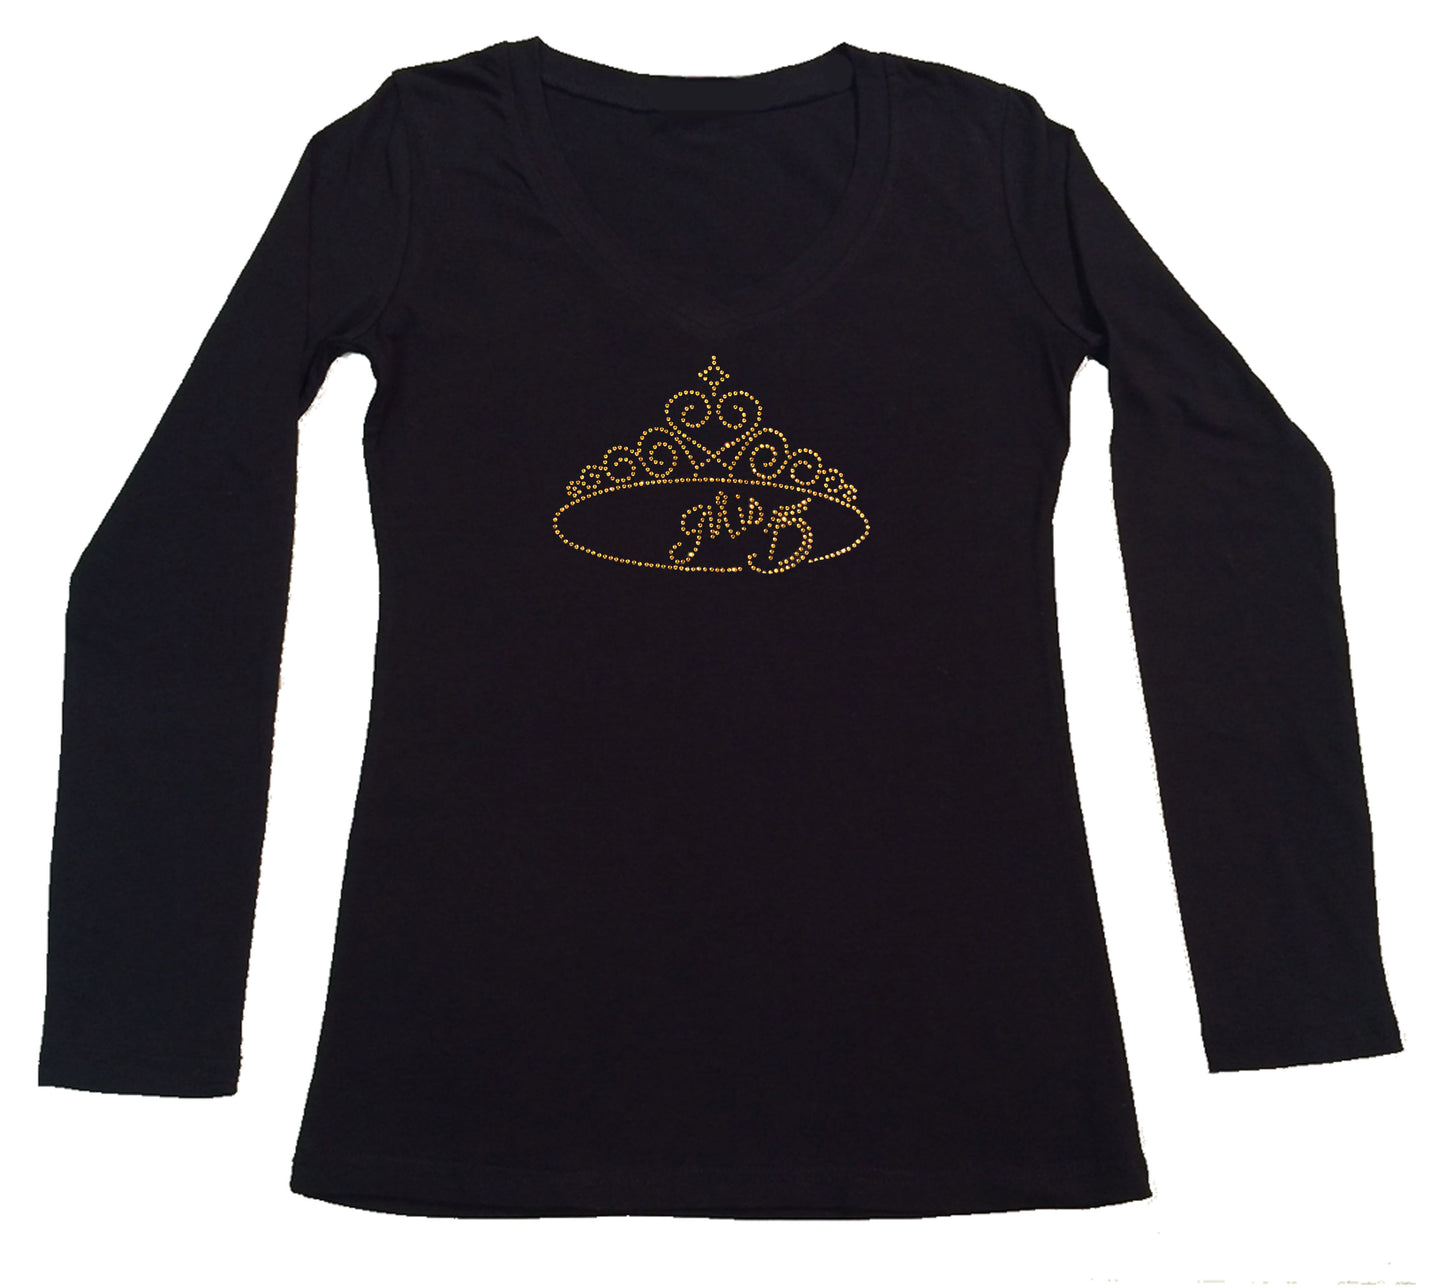 Womens T-shirt with Mis Quince Gold Tiara in Rhinestones